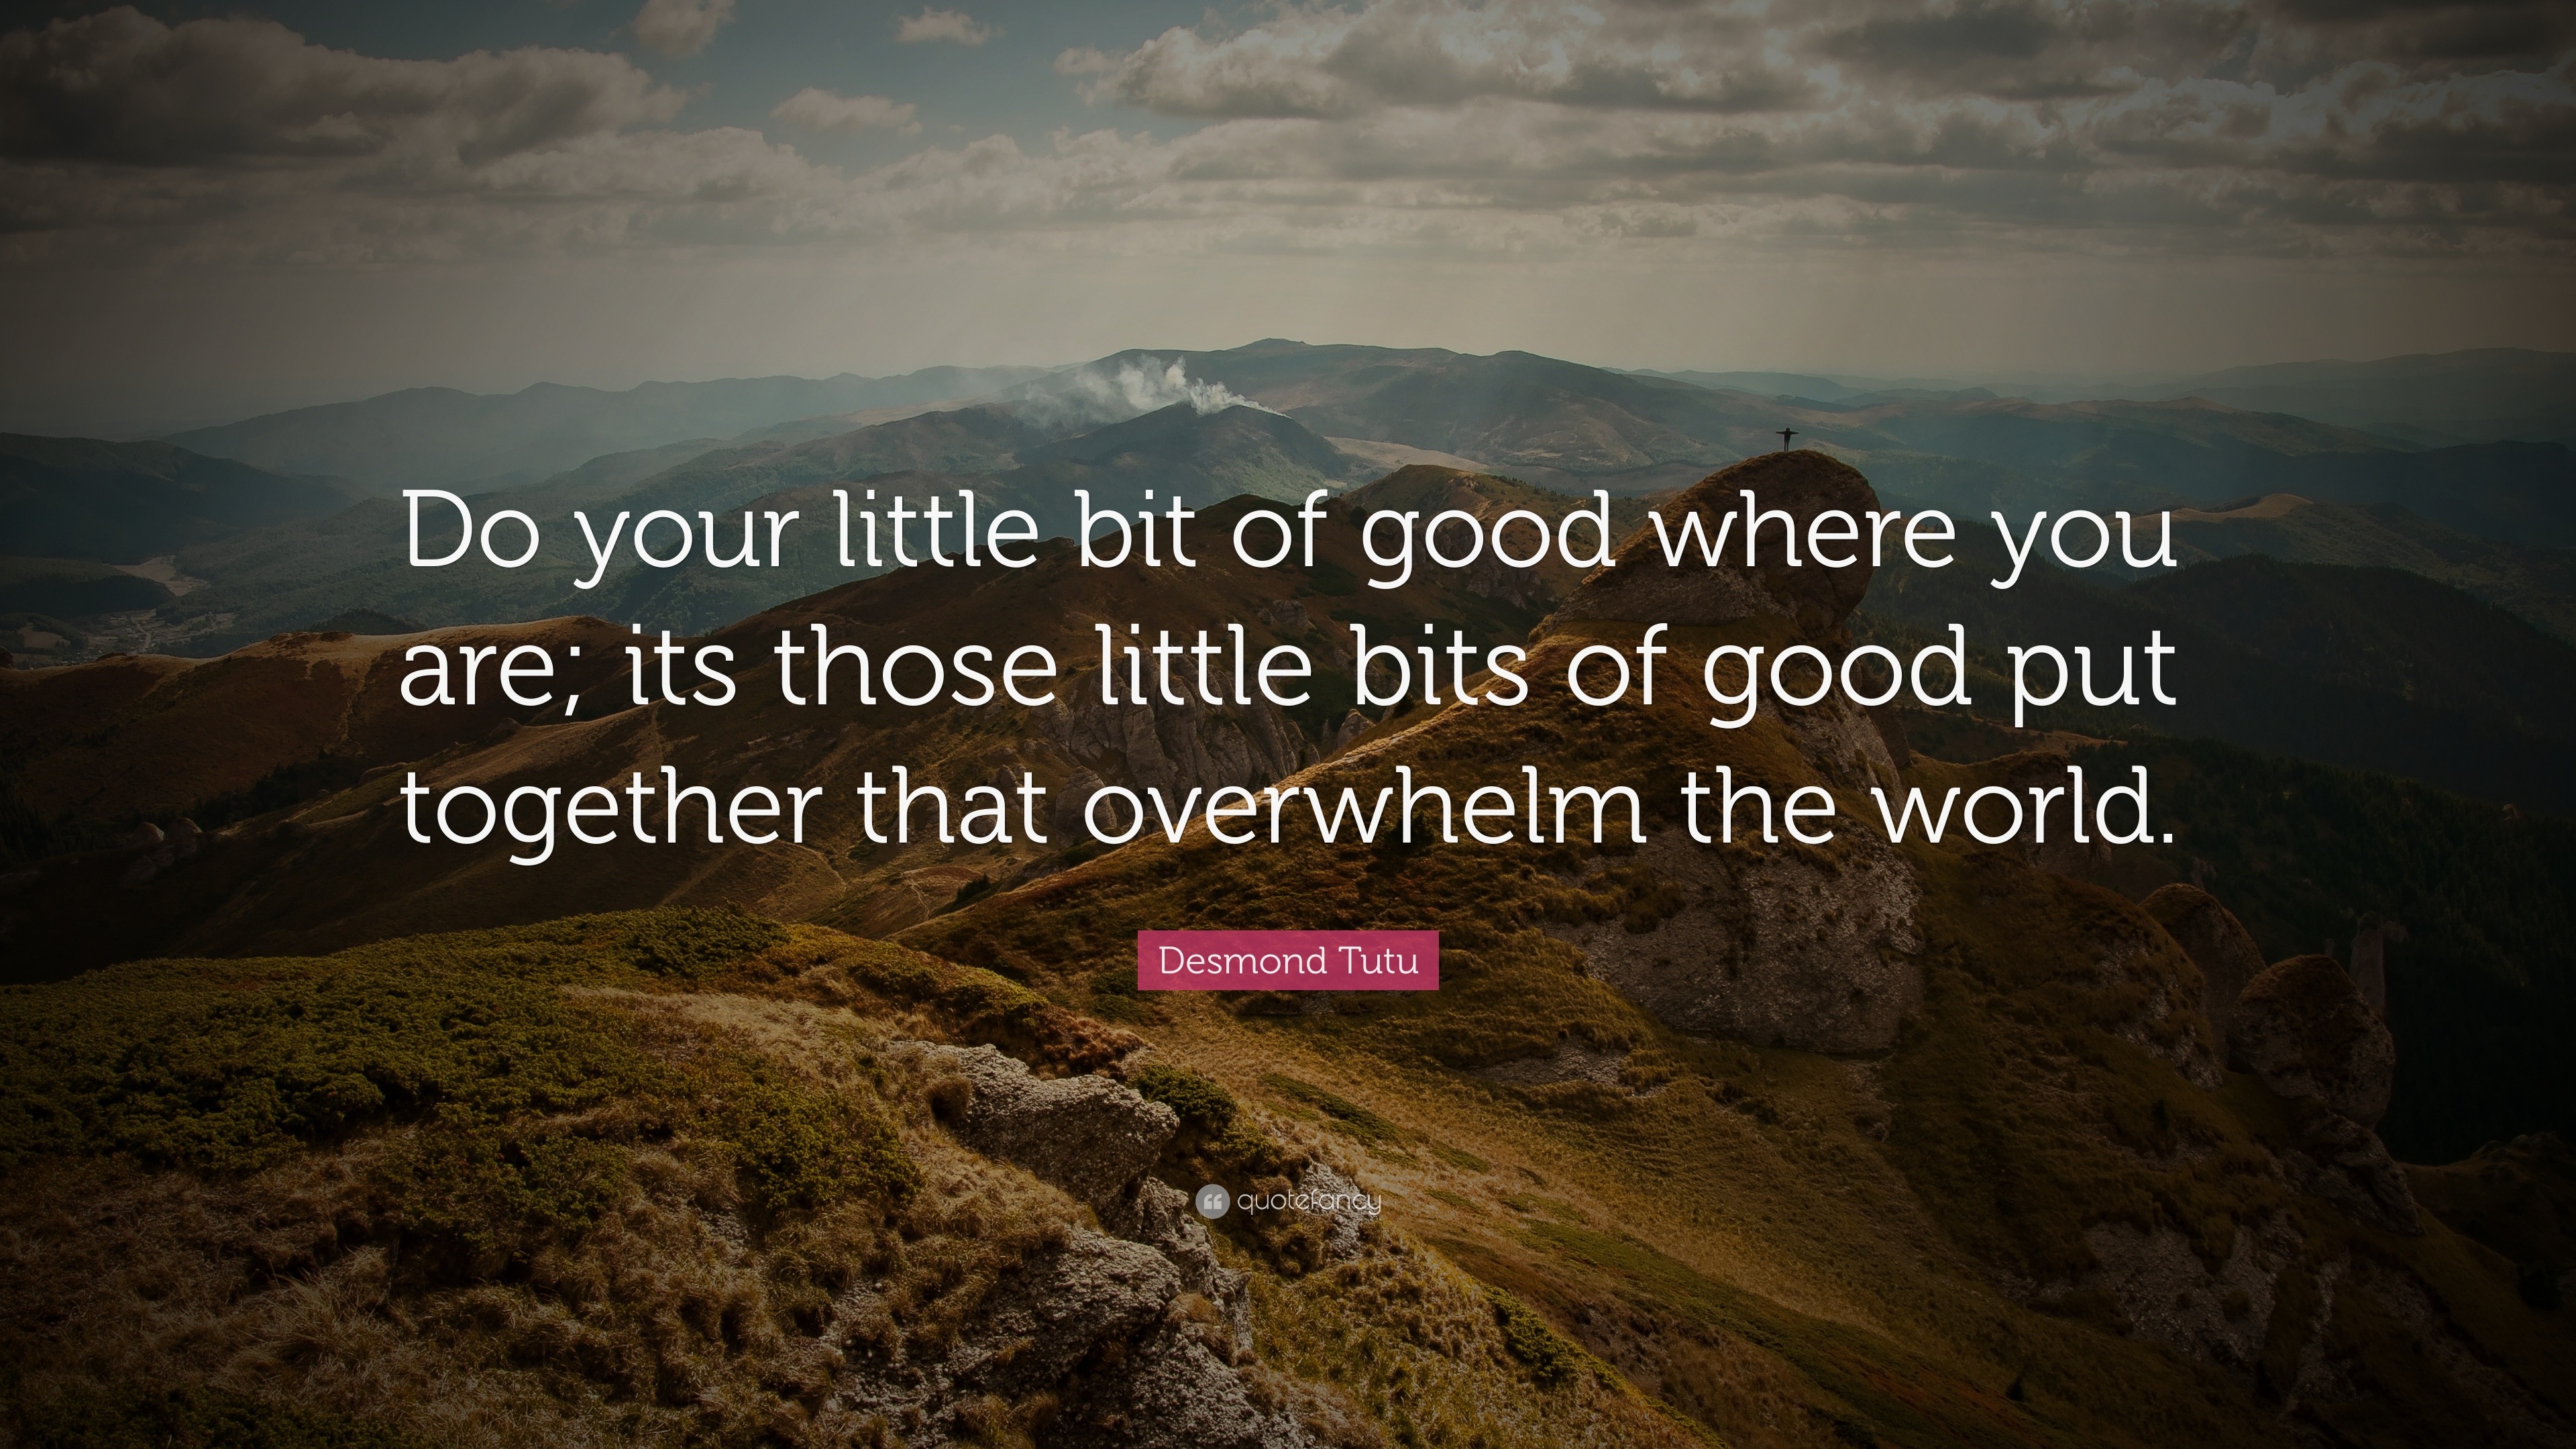 Desmond Tutu Quote: “Do your little bit of good where you are; its